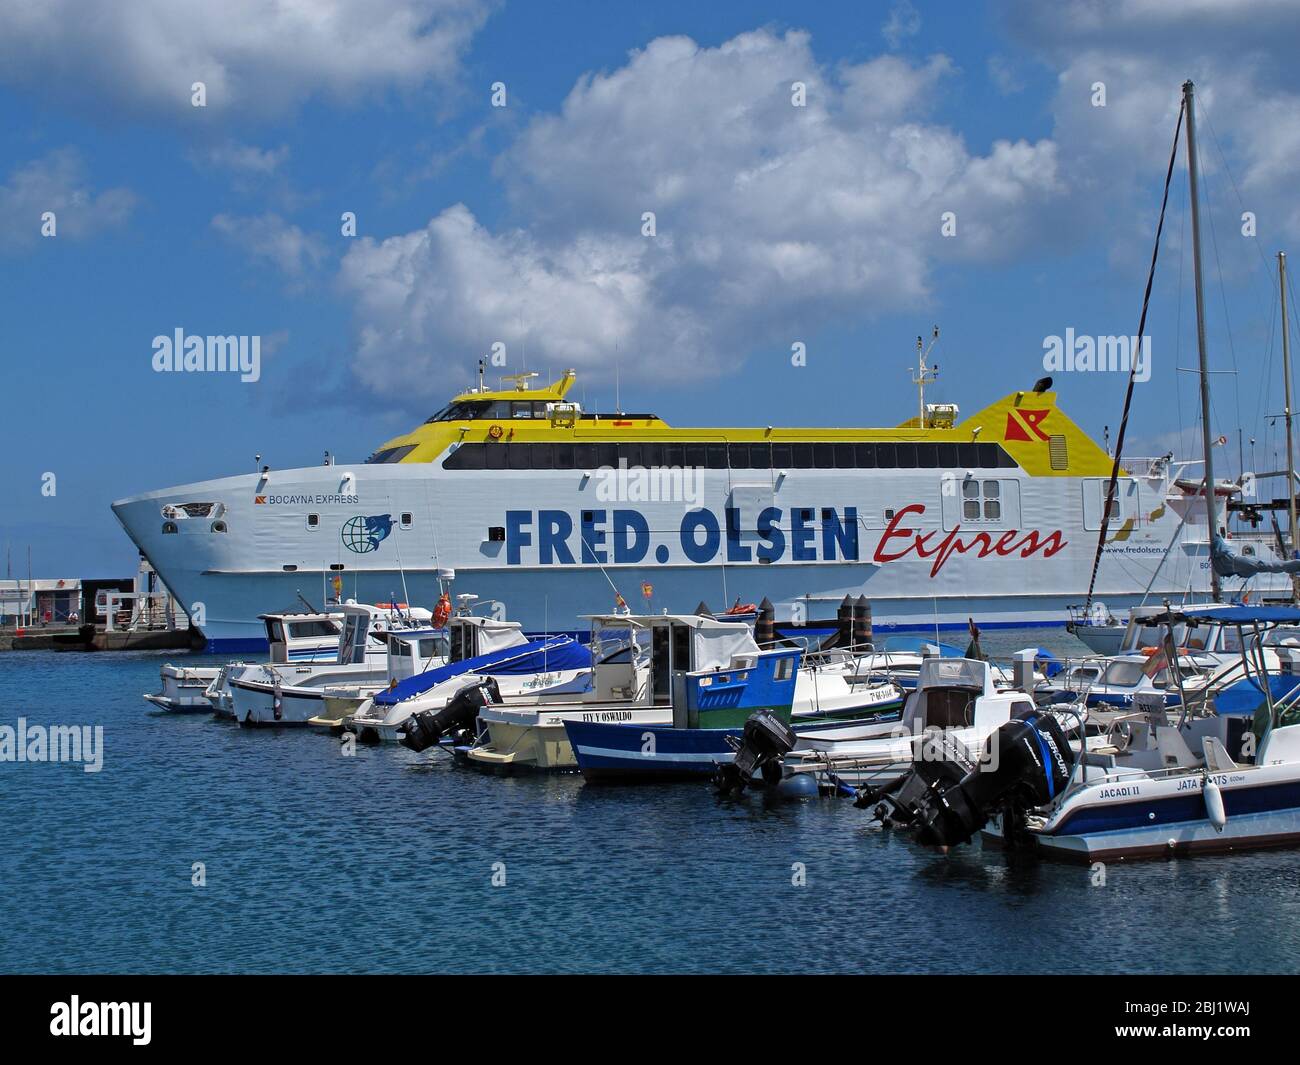 Bocayna Express Catamaran ferry, Fred Olsen express, transport maritime, Lanzarote, Canaries, Espagne, inter-île, Espagne, Europe Banque D'Images